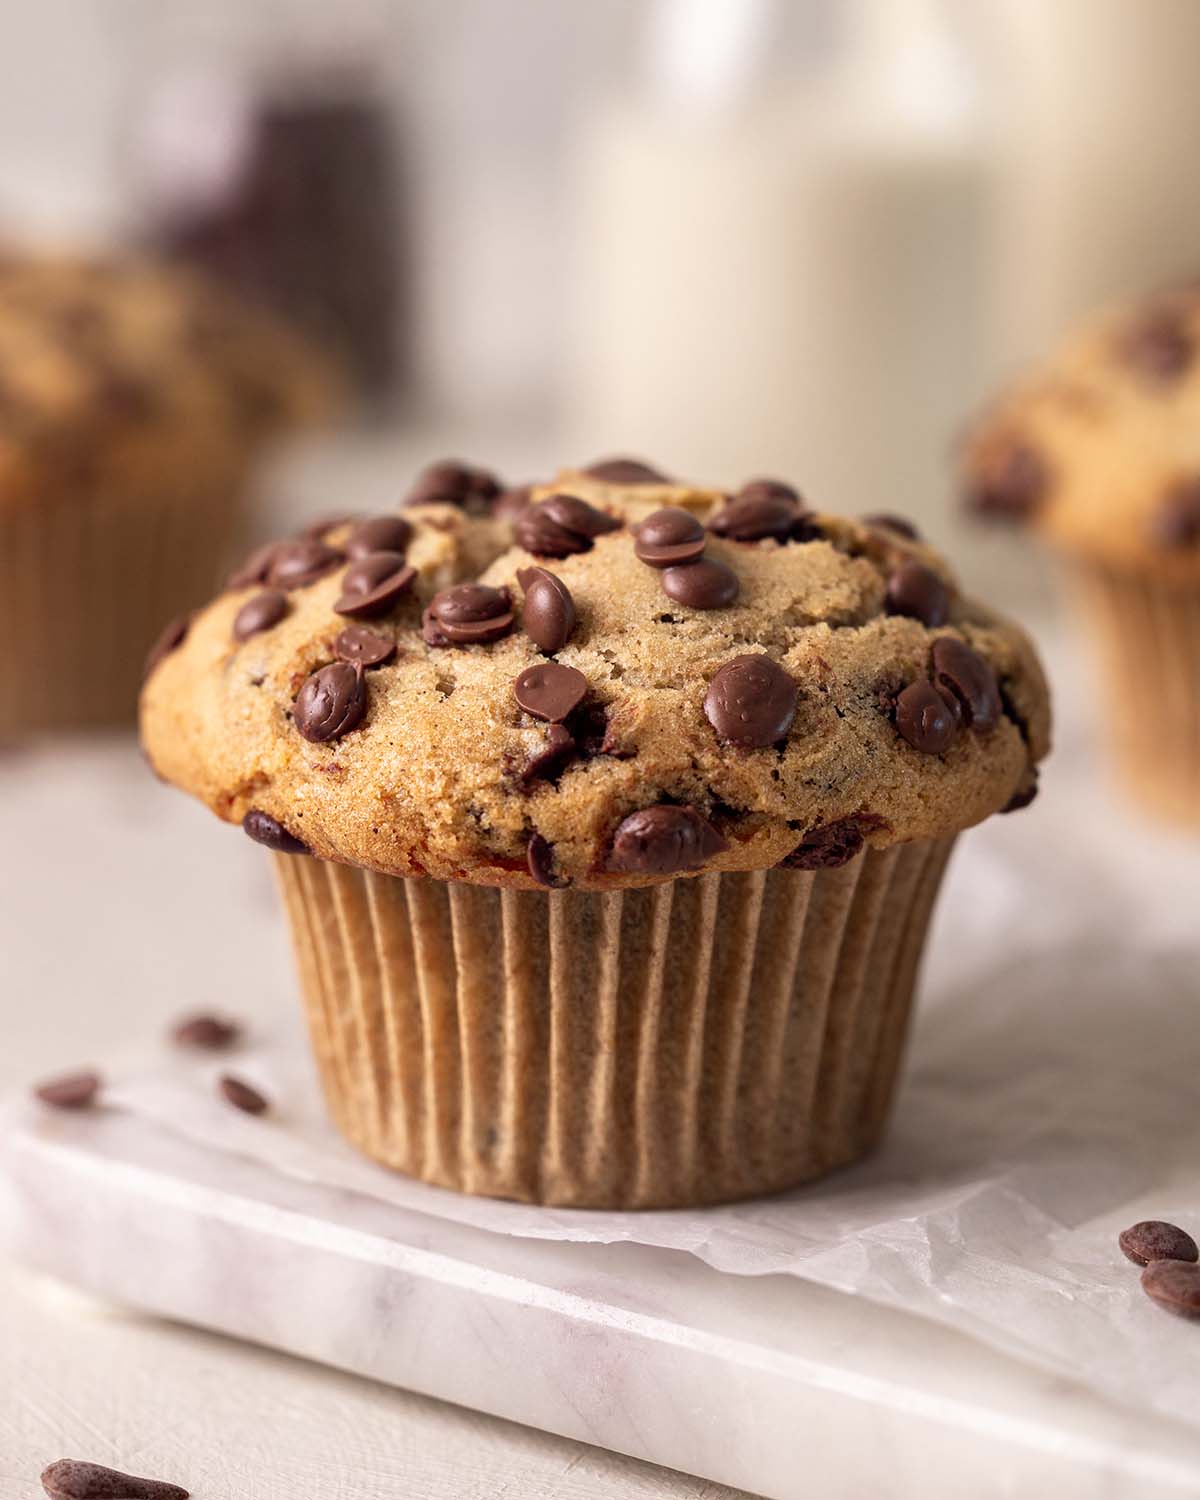 Side angle of chocolate chip muffin showing large muffin top.